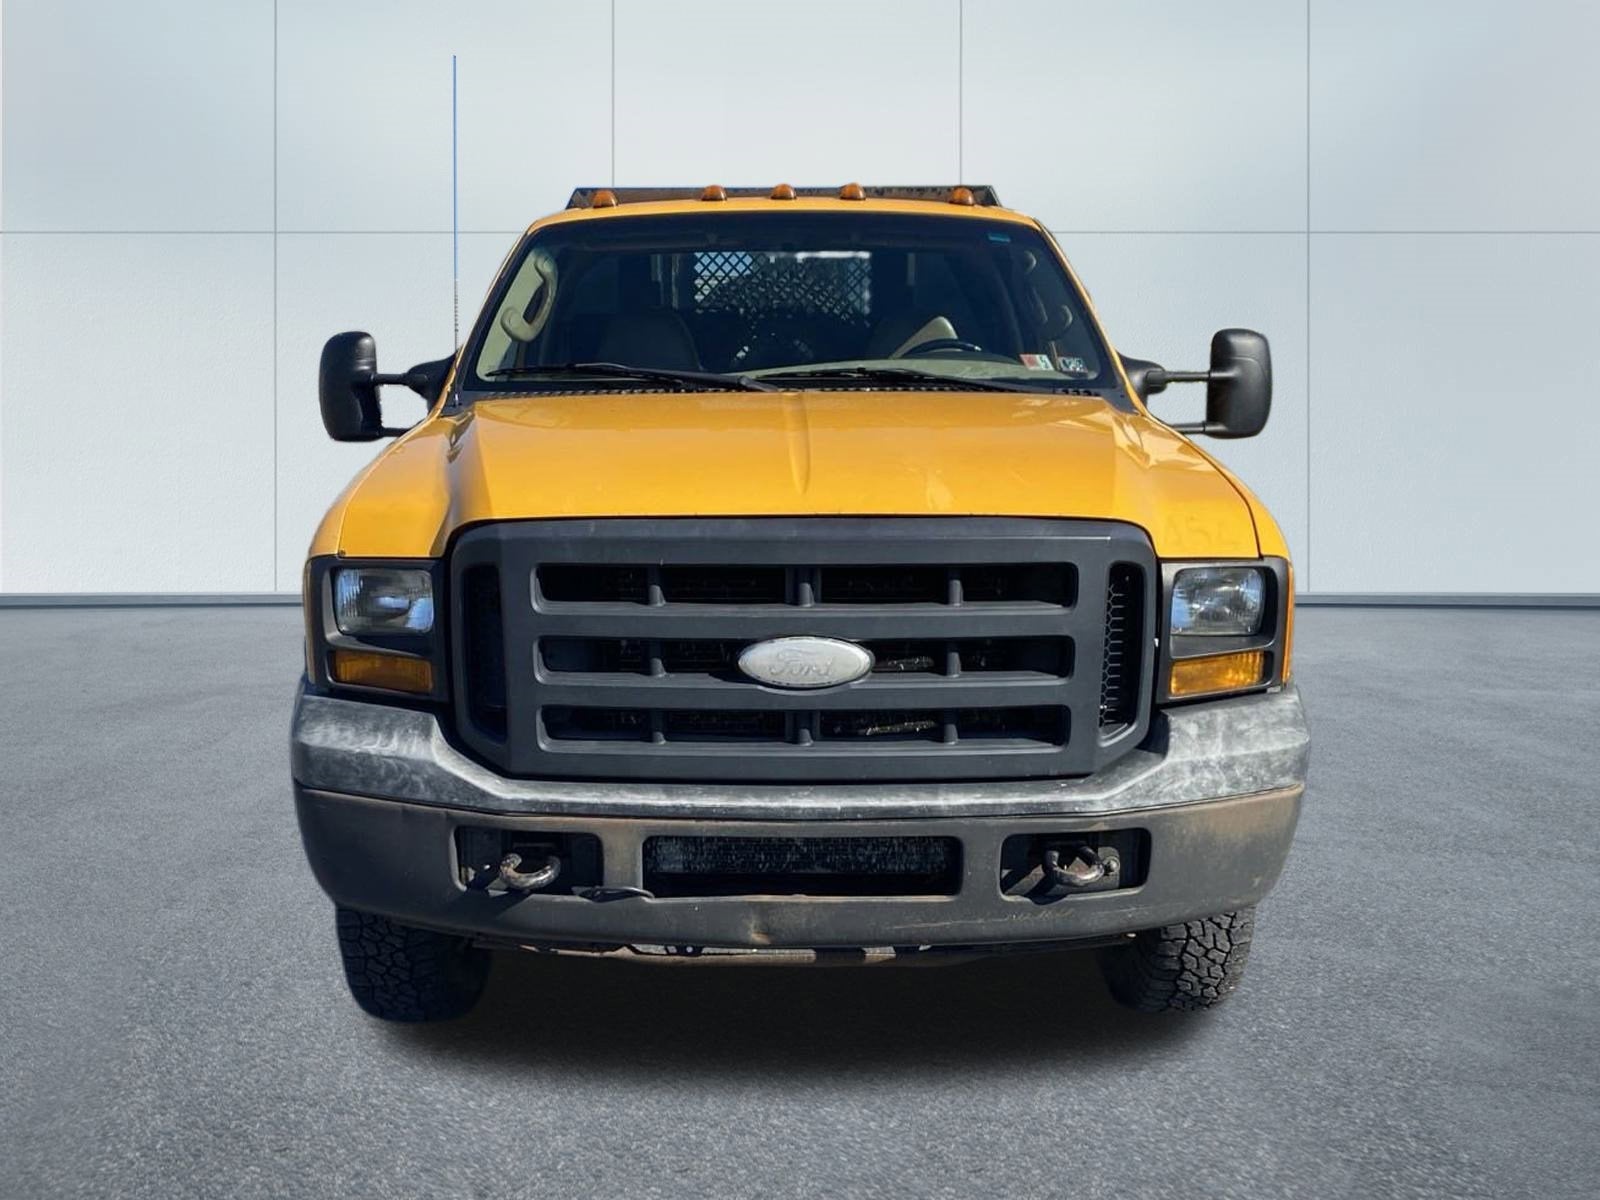 2007 Ford F-350 Chassis XL